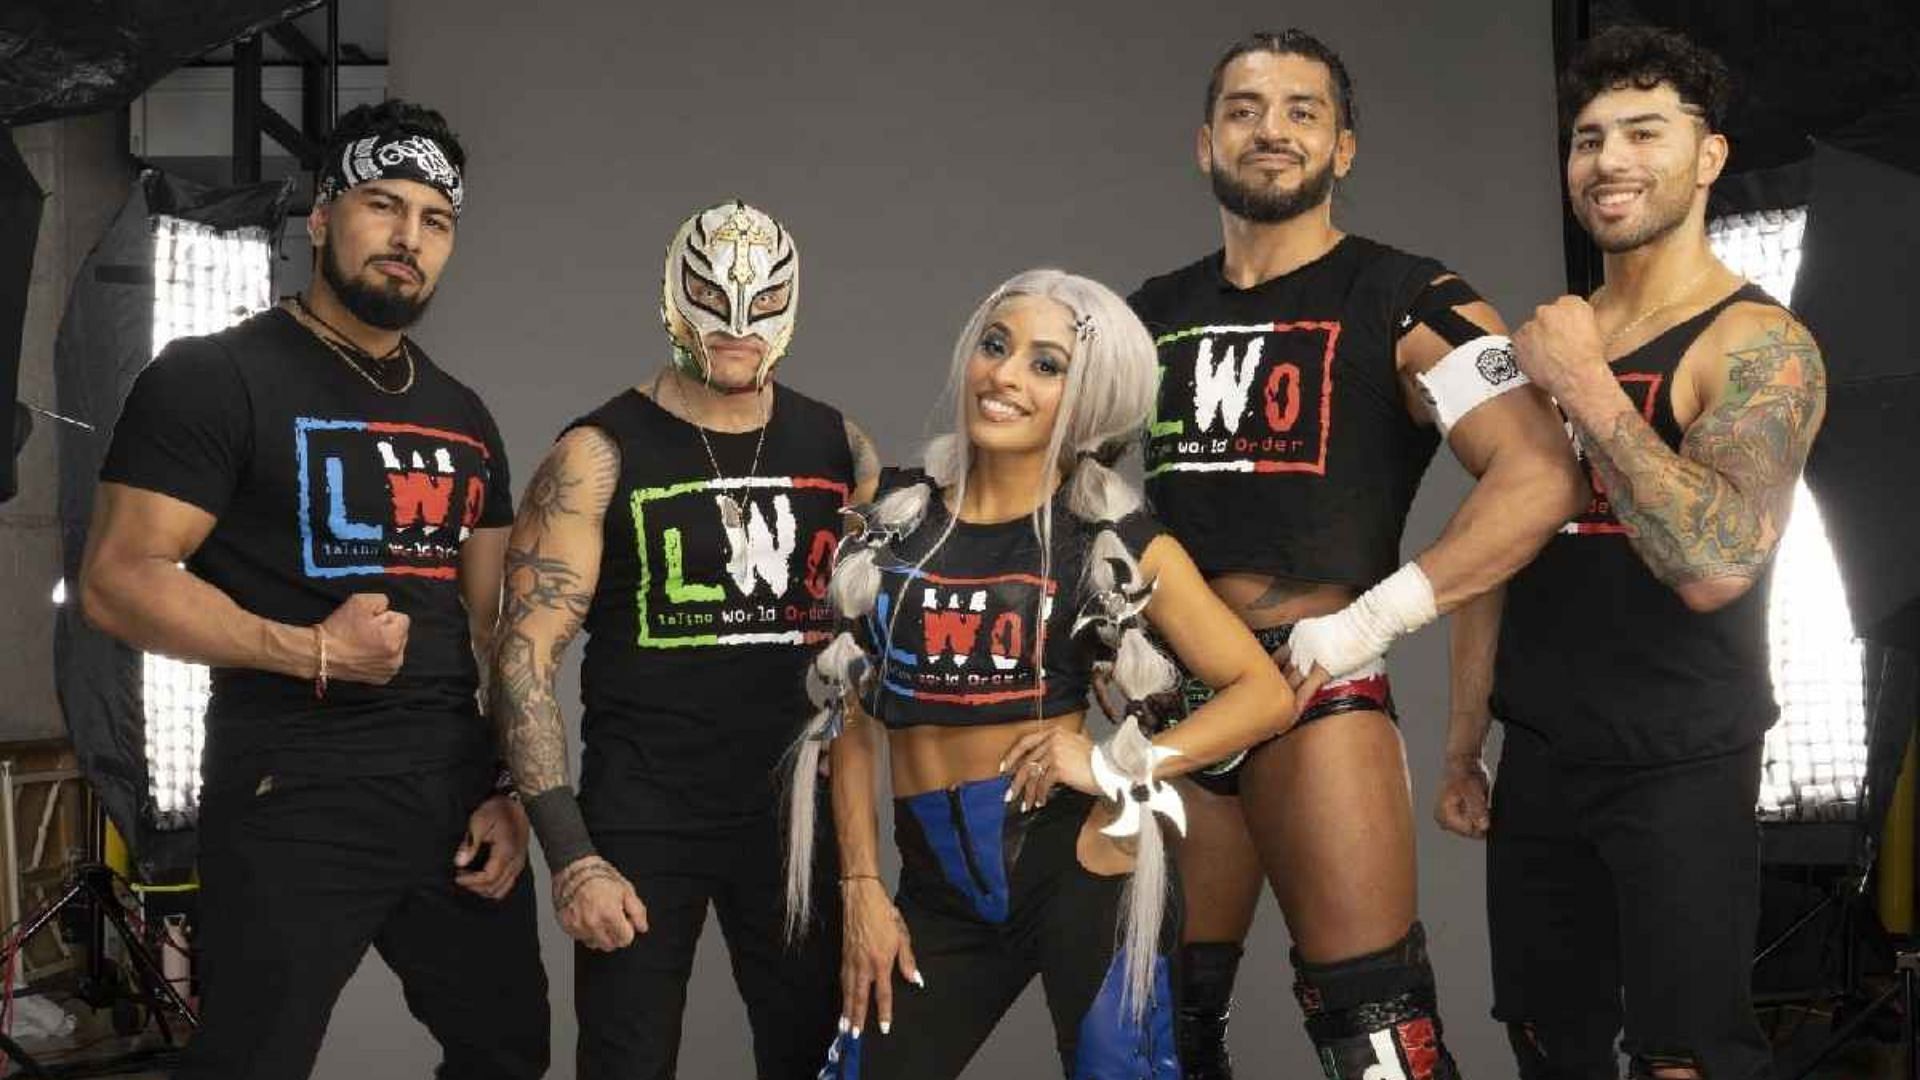 Rey Mysterio recently reformed the LWO